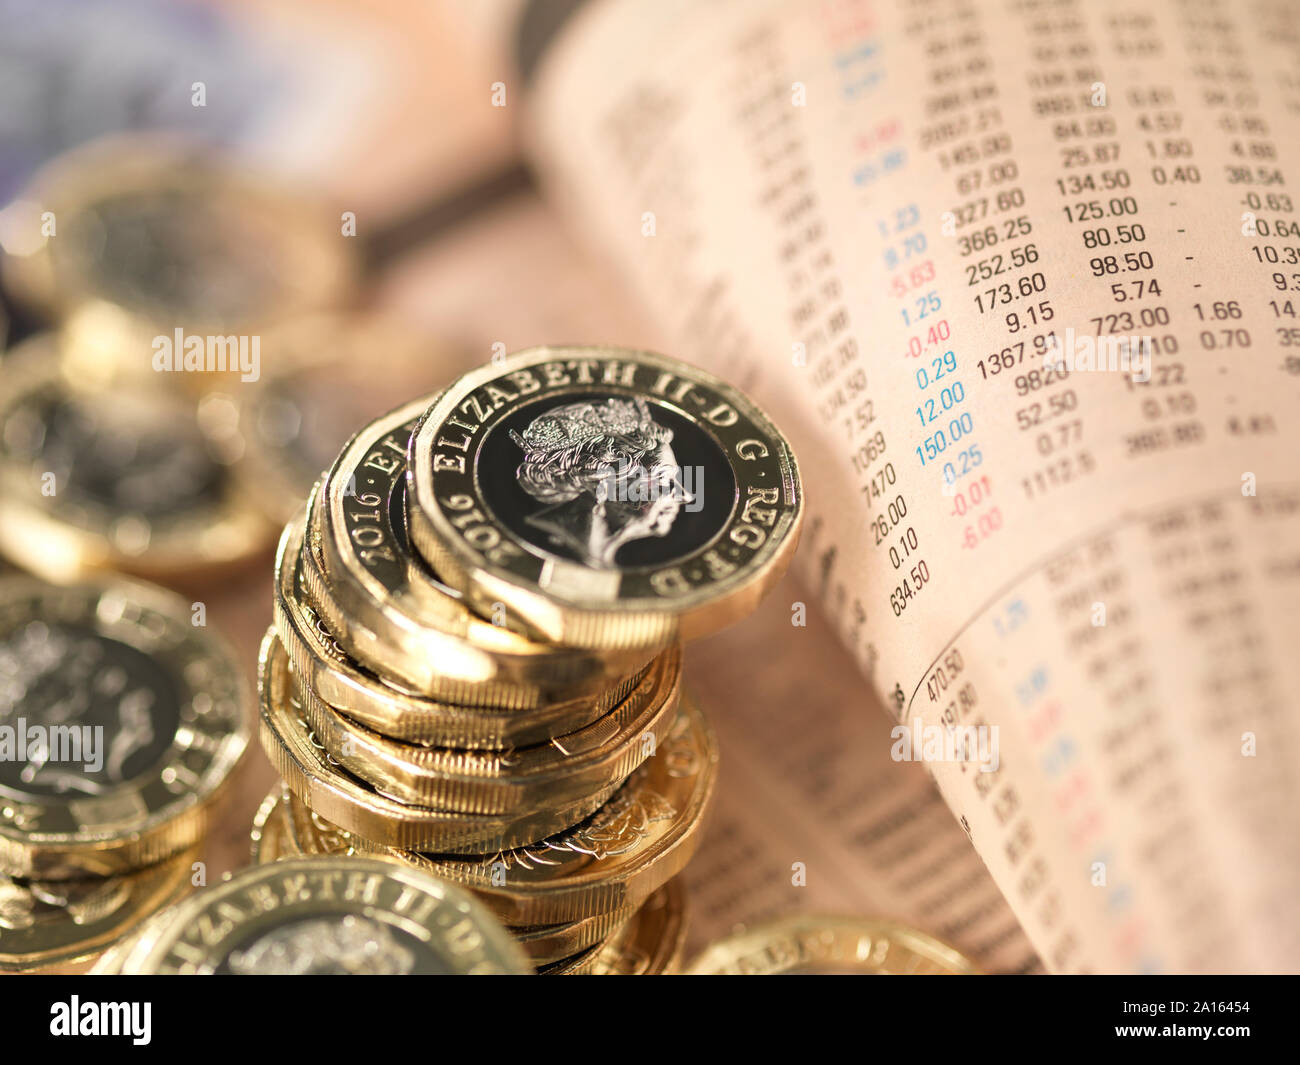 UK Finance and Economy, UK pound coins on a financial newspapers share price page Stock Photo